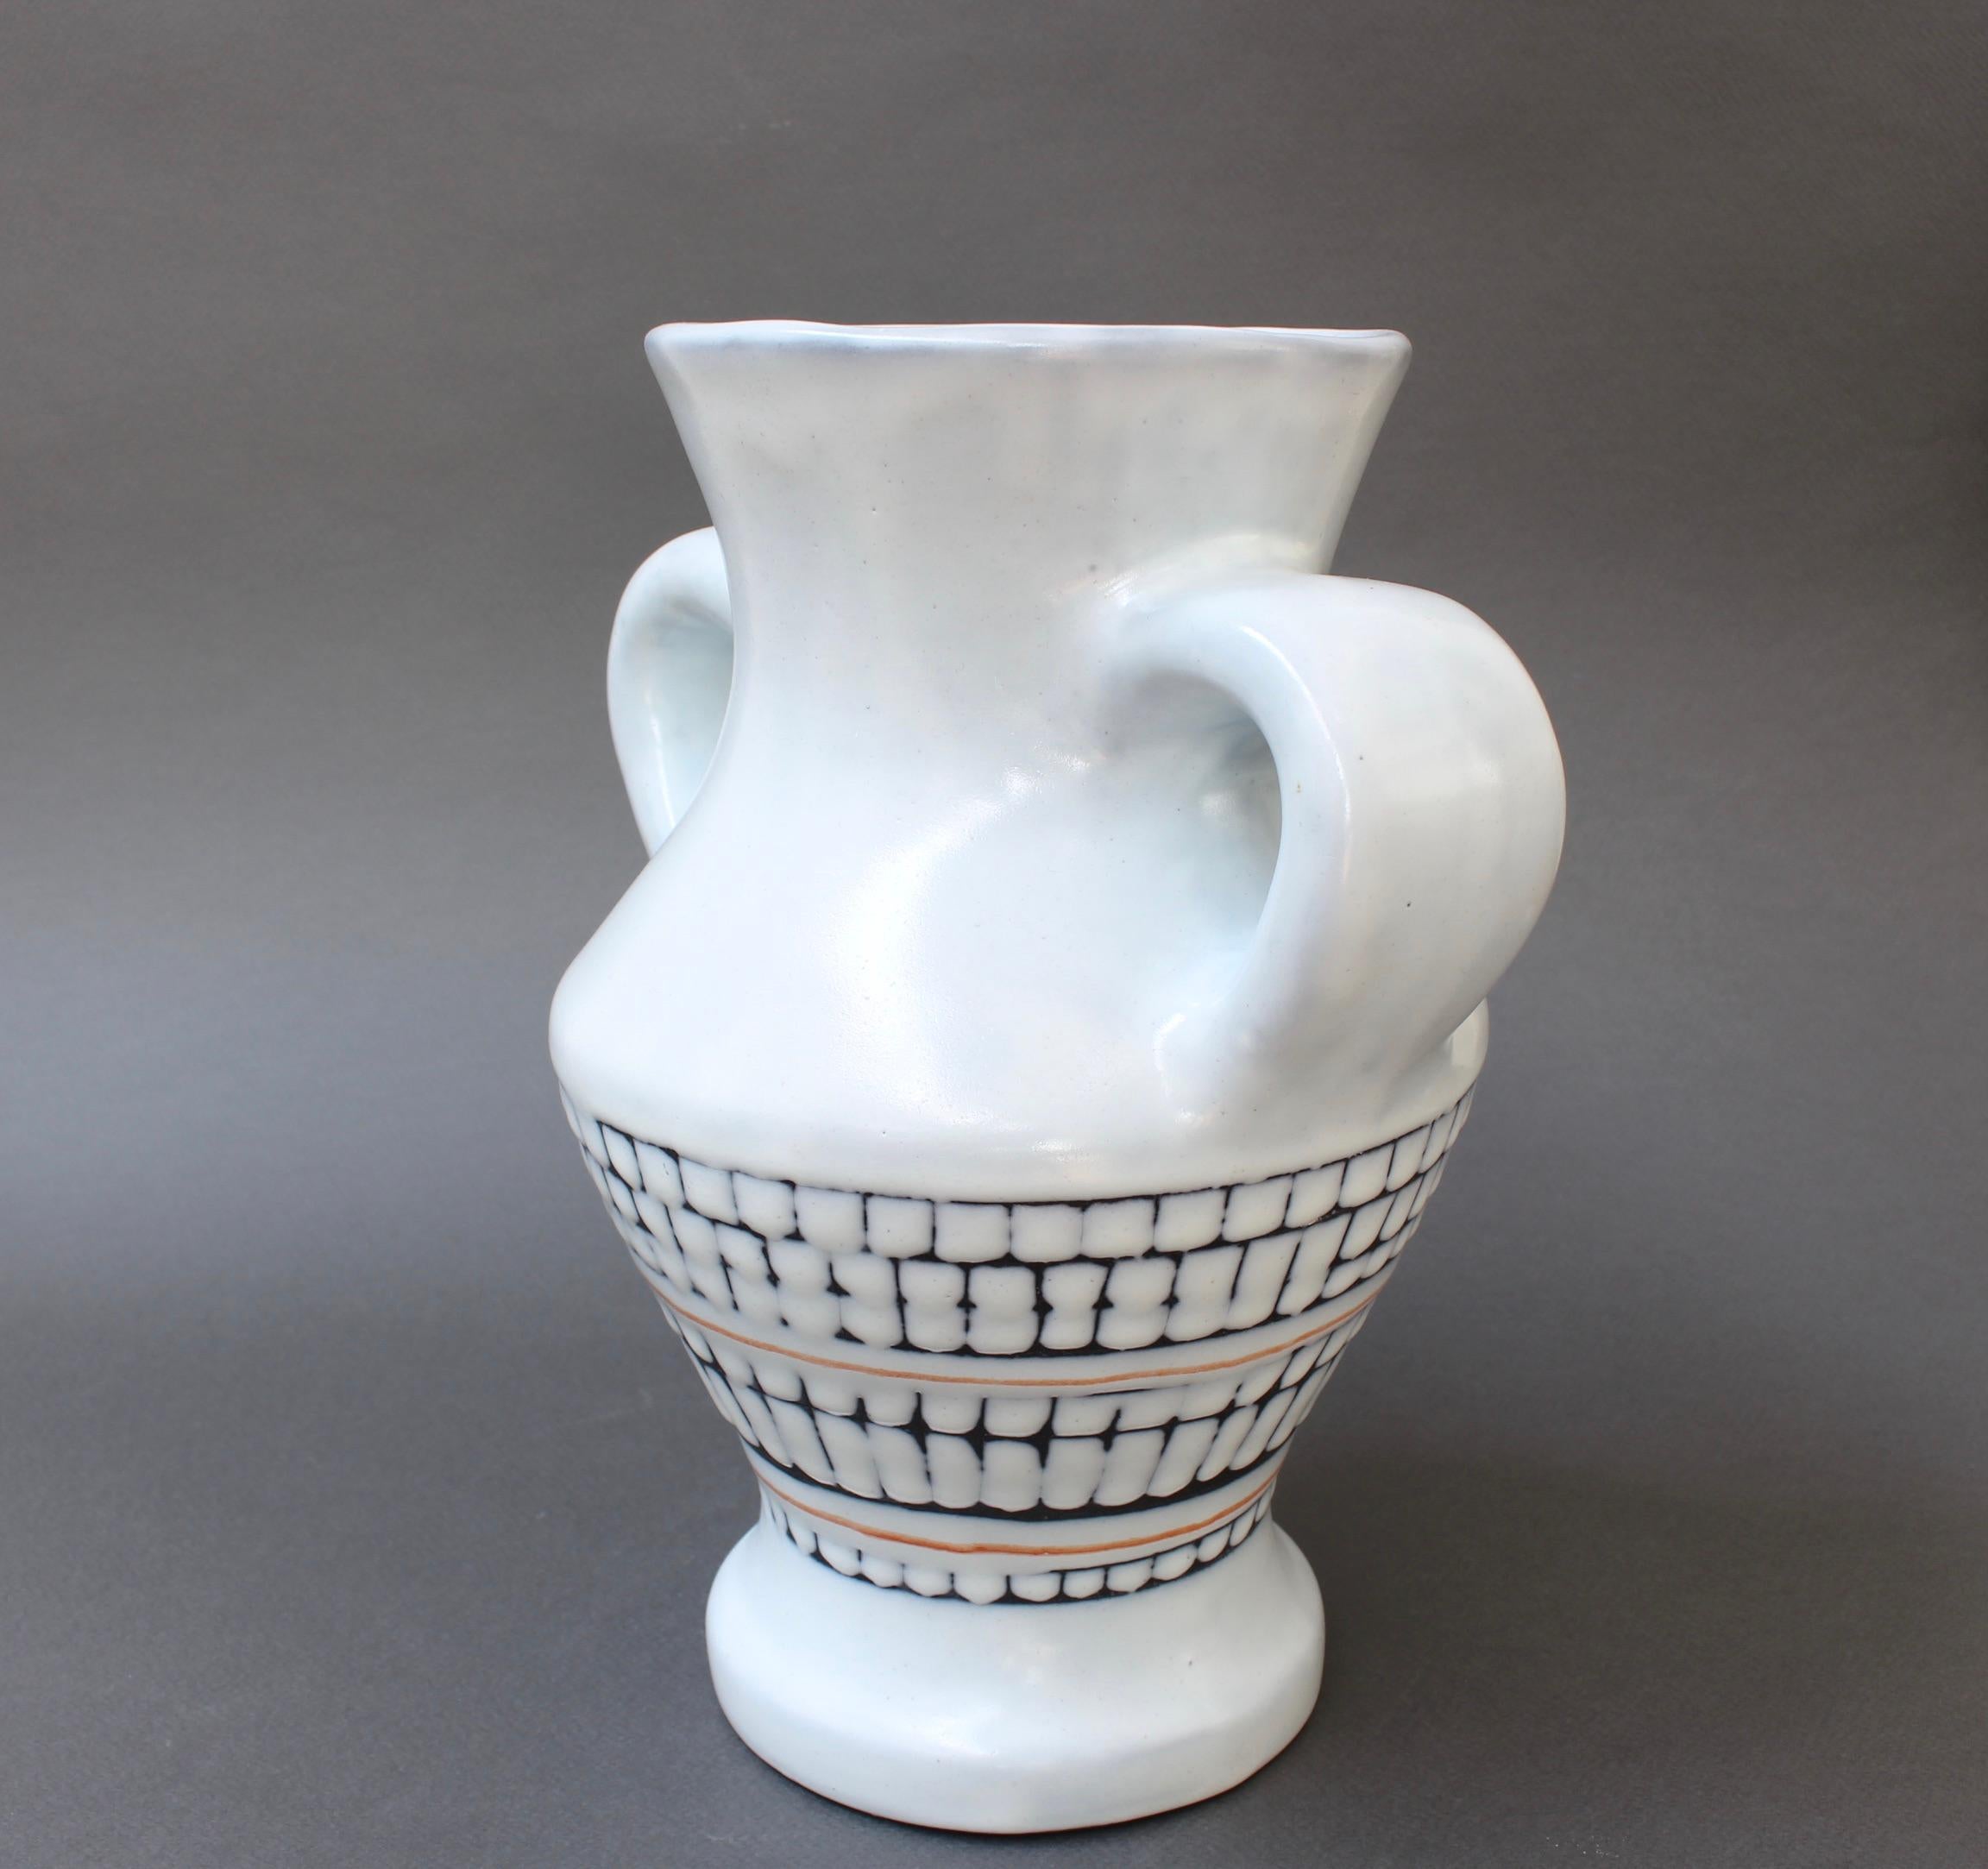 Vintage French Ceramic Vase with Handles by Roger Capron, 'circa 1950s' For Sale 2